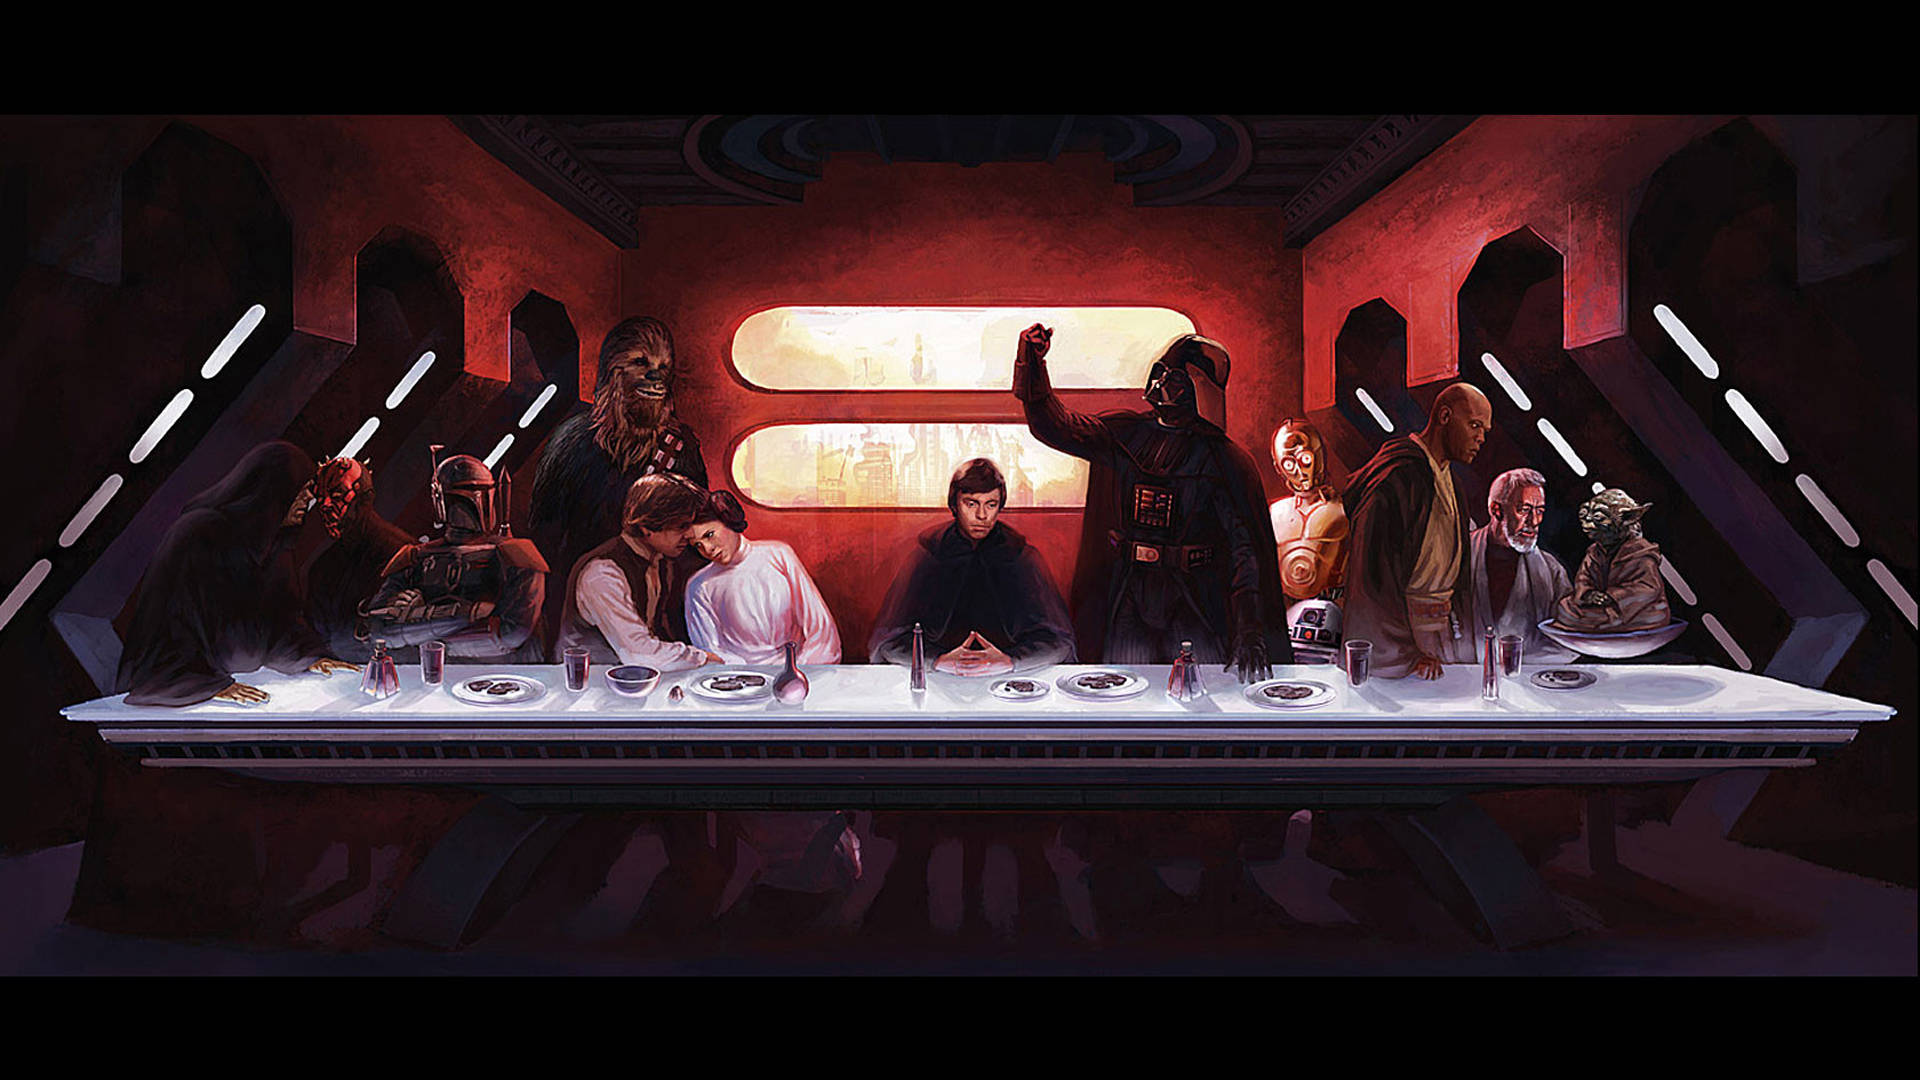 Cools Star Wars Meeting Background